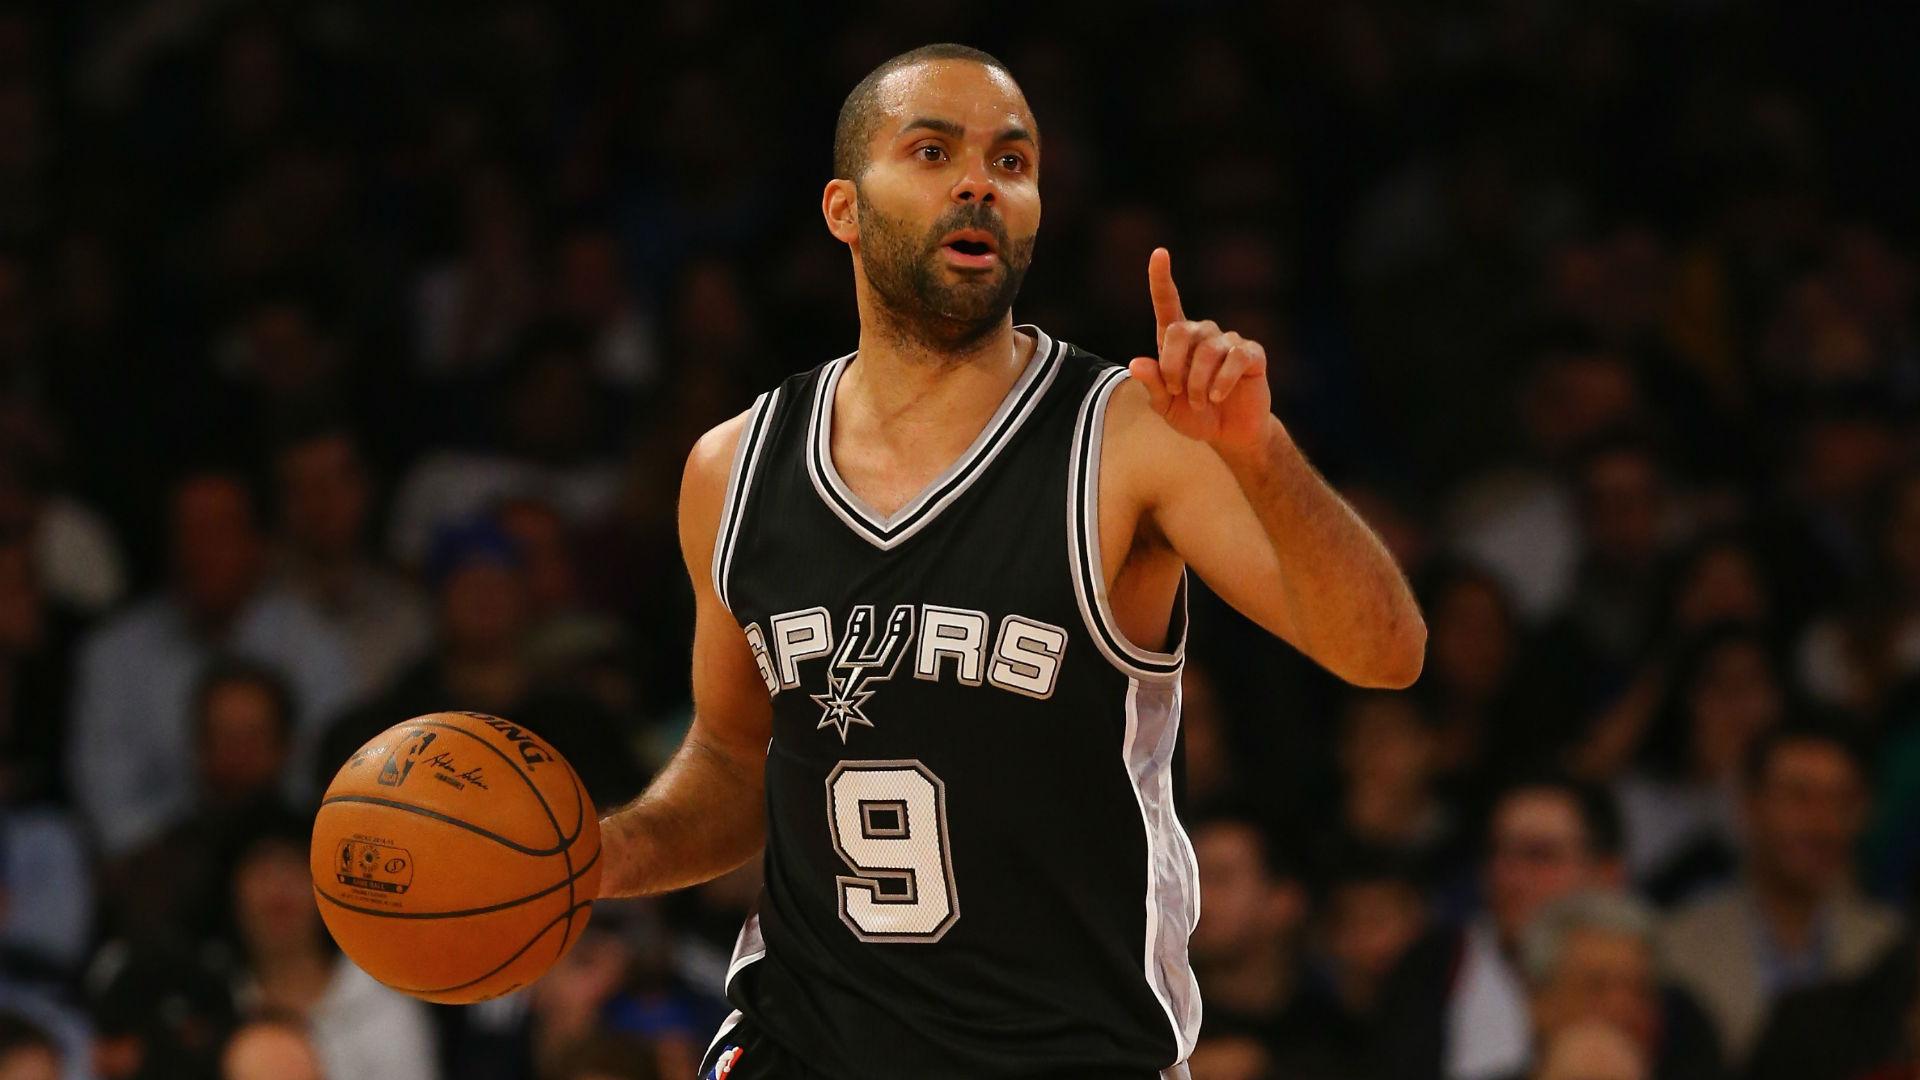 Tony Parker retires: 5 Opta facts about the point guard's legendary career | Sporting News